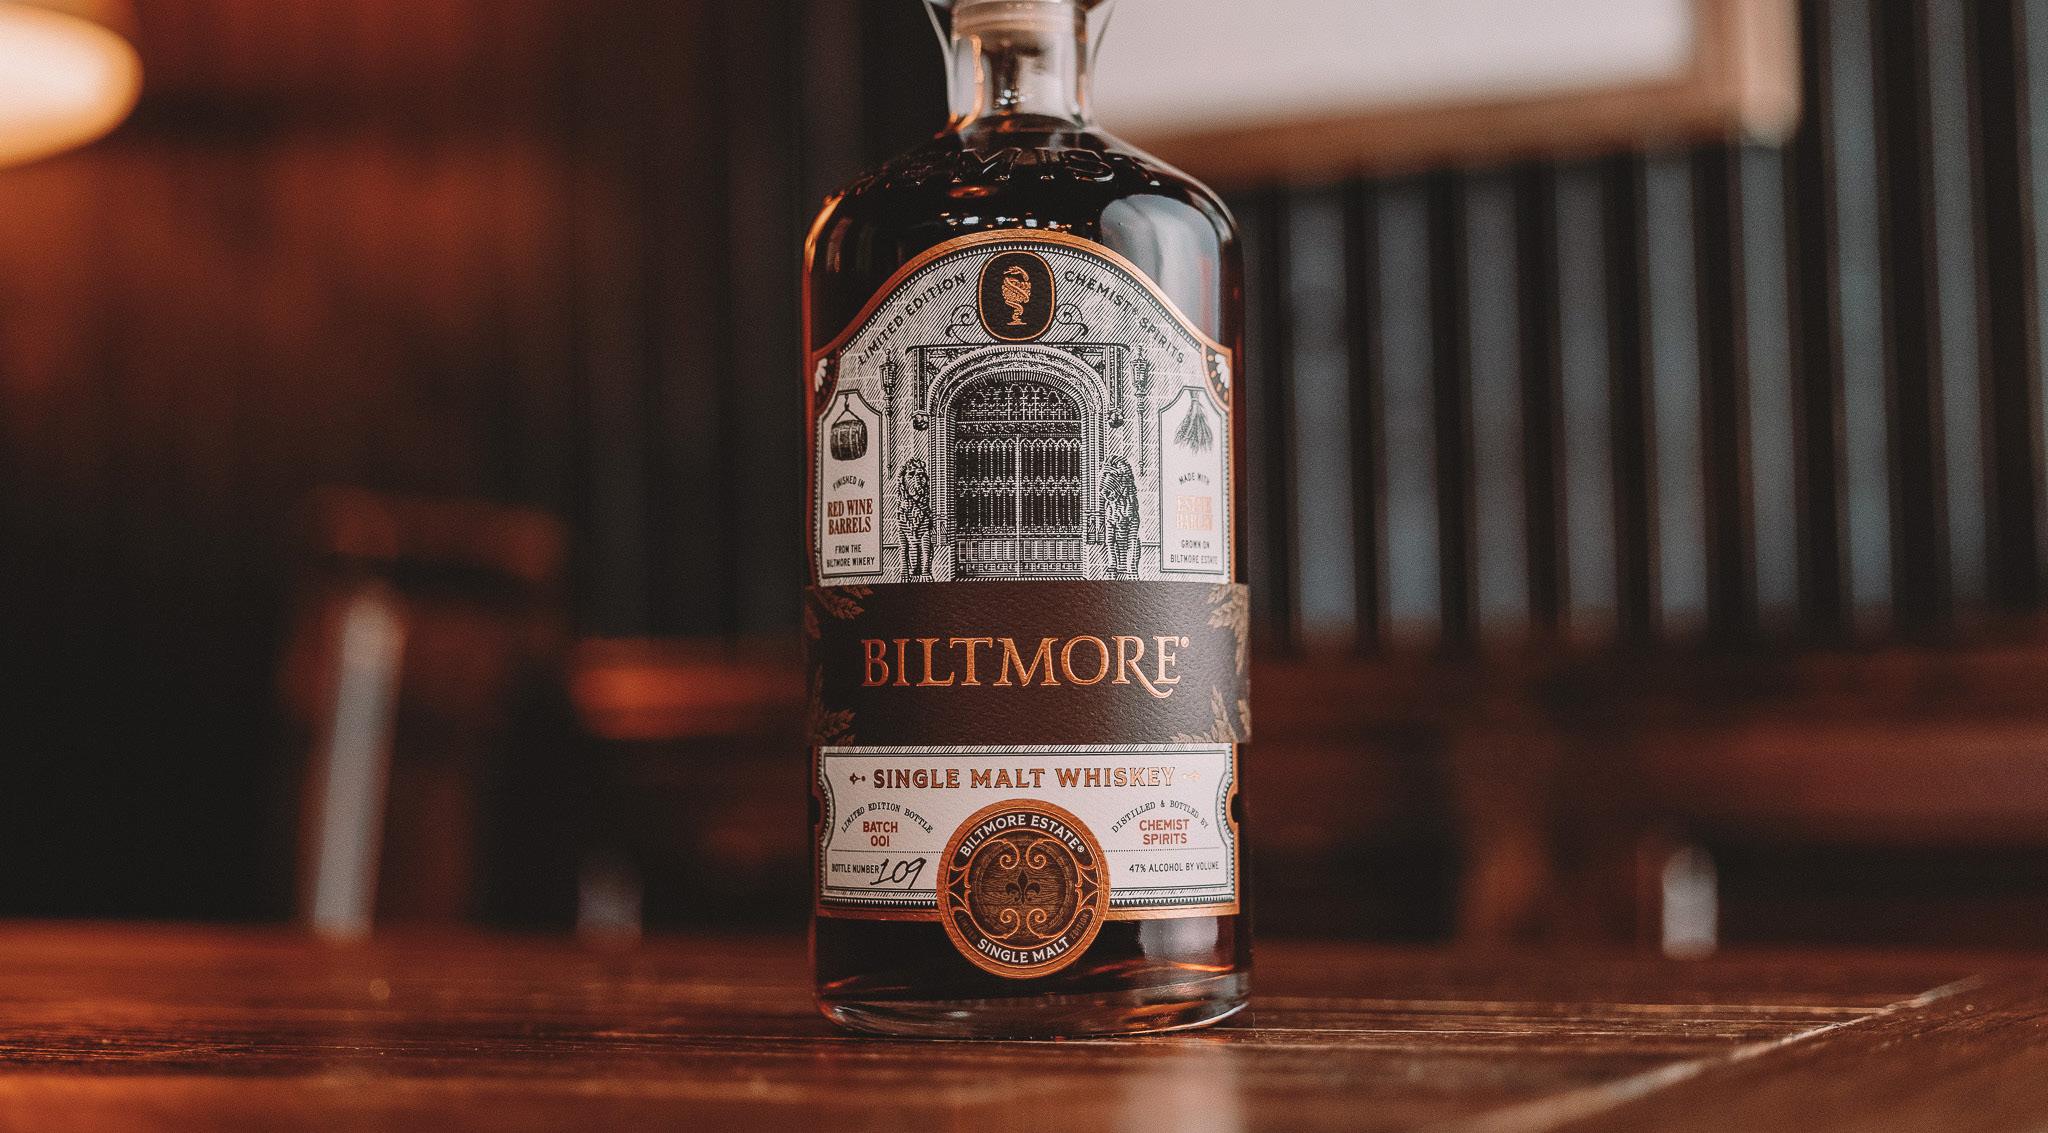 Which type of whiskey is often made with a mix of malted barley, corn, and rye?